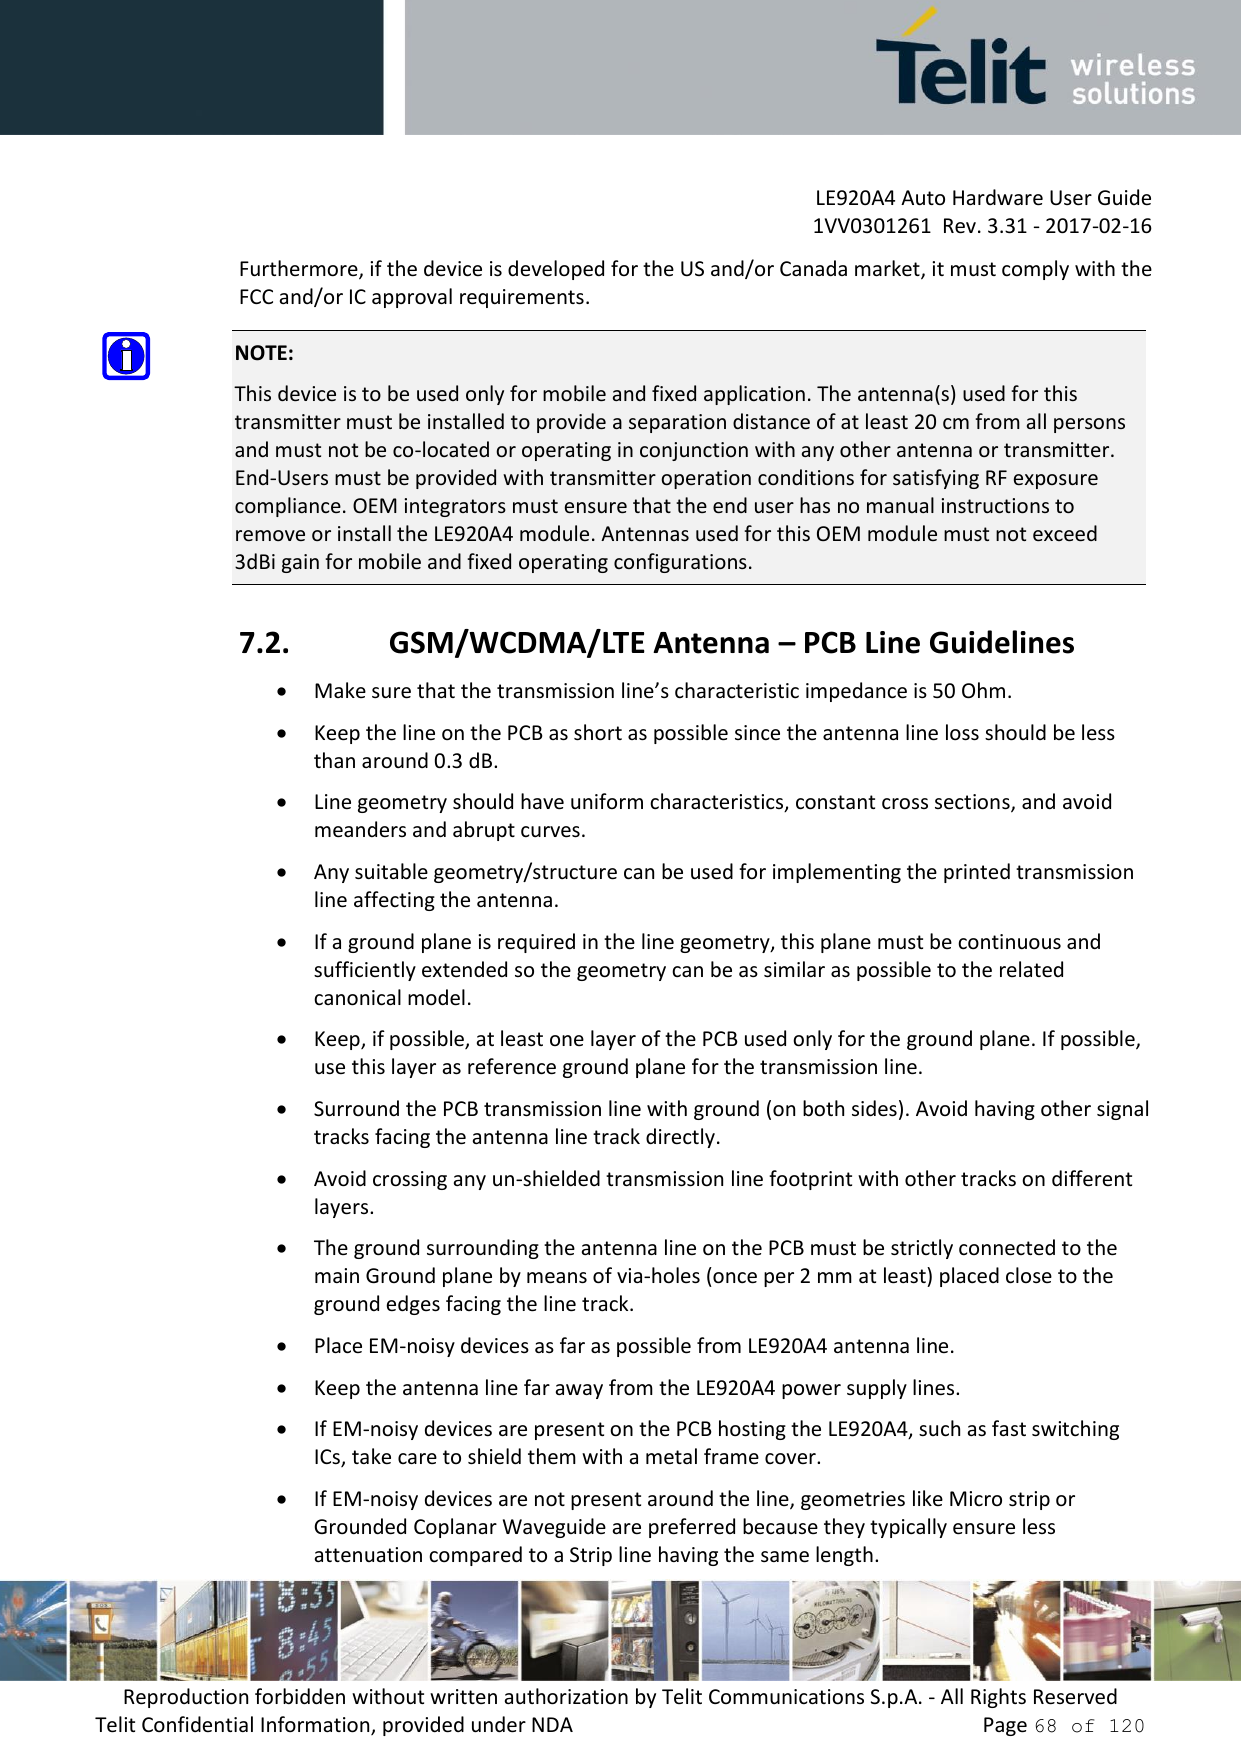         LE920A4 Auto Hardware User Guide     1VV0301261  Rev. 3.31 - 2017-02-16 Reproduction forbidden without written authorization by Telit Communications S.p.A. - All Rights Reserved Telit Confidential Information, provided under NDA                 Page 68 of 120 Furthermore, if the device is developed for the US and/or Canada market, it must comply with the FCC and/or IC approval requirements.  NOTE: This device is to be used only for mobile and fixed application. The antenna(s) used for this transmitter must be installed to provide a separation distance of at least 20 cm from all persons and must not be co-located or operating in conjunction with any other antenna or transmitter. End-Users must be provided with transmitter operation conditions for satisfying RF exposure compliance. OEM integrators must ensure that the end user has no manual instructions to remove or install the LE920A4 module. Antennas used for this OEM module must not exceed 3dBi gain for mobile and fixed operating configurations. 7.2. GSM/WCDMA/LTE Antenna – PCB Line Guidelines  Make sure that the transmission line’s characteristic impedance is 50 Ohm.  Keep the line on the PCB as short as possible since the antenna line loss should be less than around 0.3 dB.  Line geometry should have uniform characteristics, constant cross sections, and avoid meanders and abrupt curves.  Any suitable geometry/structure can be used for implementing the printed transmission line affecting the antenna.  If a ground plane is required in the line geometry, this plane must be continuous and sufficiently extended so the geometry can be as similar as possible to the related canonical model.  Keep, if possible, at least one layer of the PCB used only for the ground plane. If possible, use this layer as reference ground plane for the transmission line.  Surround the PCB transmission line with ground (on both sides). Avoid having other signal tracks facing the antenna line track directly.  Avoid crossing any un-shielded transmission line footprint with other tracks on different layers.  The ground surrounding the antenna line on the PCB must be strictly connected to the main Ground plane by means of via-holes (once per 2 mm at least) placed close to the ground edges facing the line track.  Place EM-noisy devices as far as possible from LE920A4 antenna line.  Keep the antenna line far away from the LE920A4 power supply lines.  If EM-noisy devices are present on the PCB hosting the LE920A4, such as fast switching ICs, take care to shield them with a metal frame cover.  If EM-noisy devices are not present around the line, geometries like Micro strip or Grounded Coplanar Waveguide are preferred because they typically ensure less attenuation compared to a Strip line having the same length. 